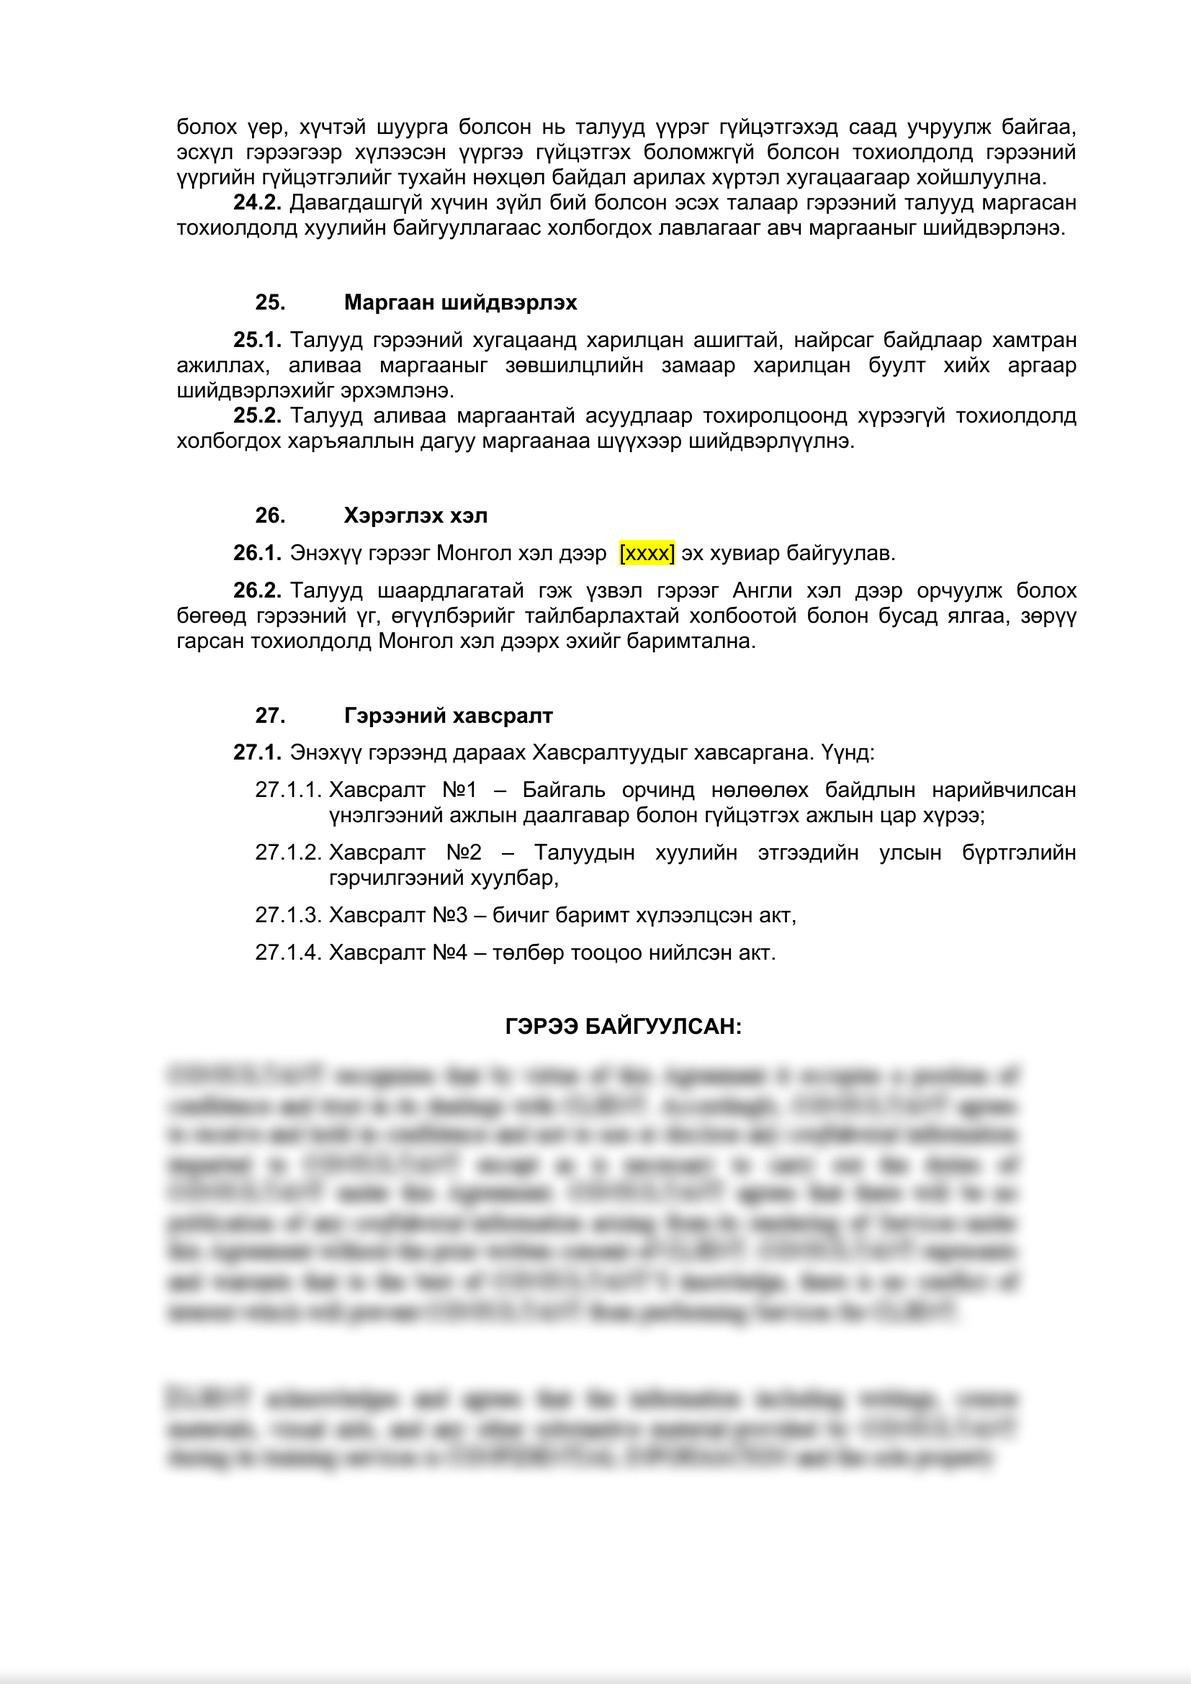 Contract for performing service for detailed environmental impact assessment-2